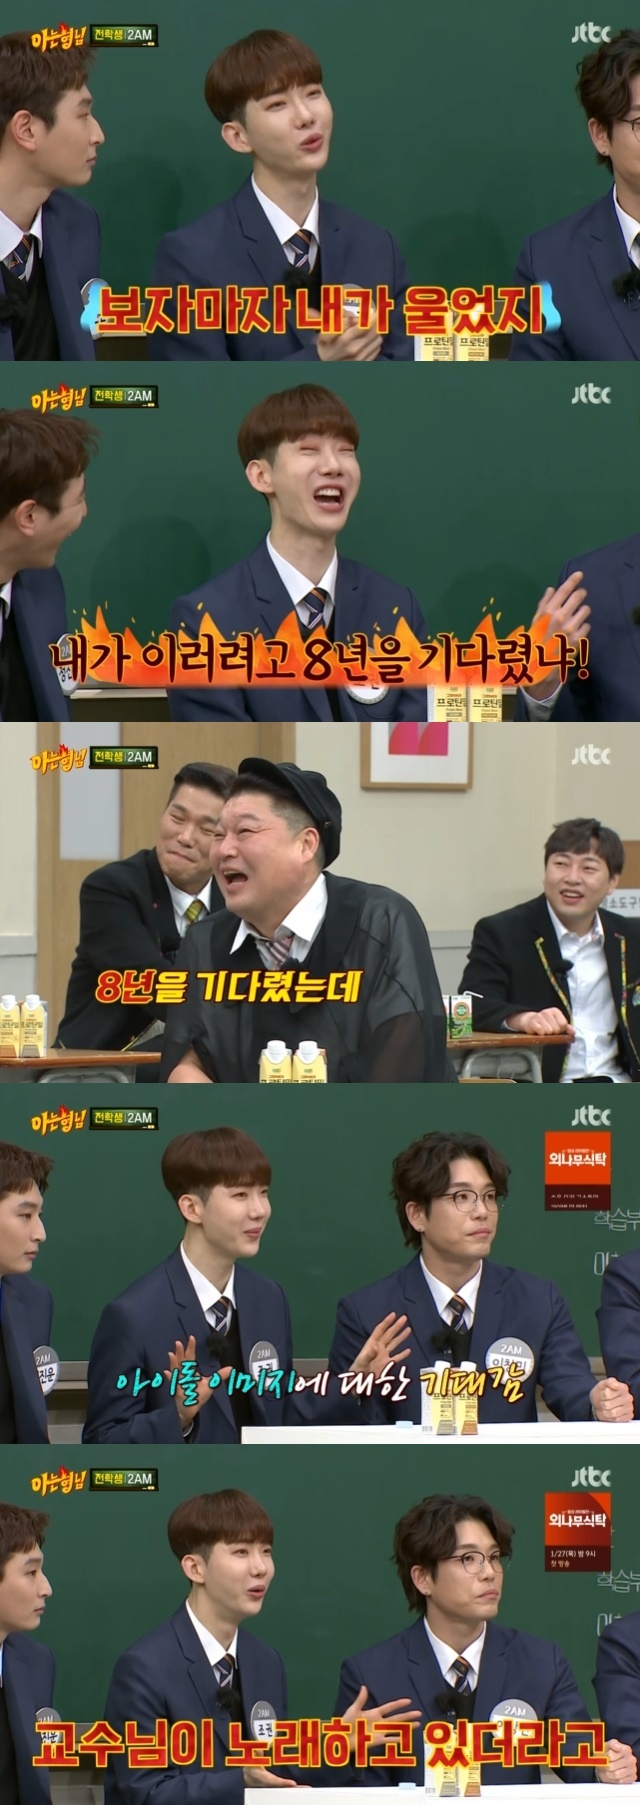 Jo Kwon first saw Lee Chang-min and told his luck story.In the 315th episode of the JTBC entertainment program Knowing Bros (hereinafter referred to as sub-type), which aired on January 15, Jo Kwon, Lim Seul-ong, Jeong Jinwoon and Lee Chang-min of 2AM, transferred to their brothers school.Kang Ho-dong asked Lee Chang-min, Is this not supposed to be on the air? Is there a reason why you are suddenly handsome?Lee Chang-min said, I met him for a long time and hes handsome.Lim Seul-ong explained instead that he did nothing, saying, The mid-20s were this face. I think this face is good to keep now.Jo Kwon recalled the past: I cried when I first saw Lee Chang-min.Lim Seul-ong added, I cried in front of me, and Jo Kwon said, I was resting at the hostel, and Changmin contacted me. I opened my laptop and came to my room.We finally got our last member. I pressed the space bar with a trembling mind, and as soon as I saw it, I cried. Jo Kwon said, At that time, Changmin was over 100kg before dieting and there were 50 facial spots.Lee Chang-min said, No, 30. Lim Seul-ong said, At that time, I went to the store and got a discount of 50%, but it was 150,000 won. Jo Kwon recalled, It was a dragon in Gaecheon.Is not it really a crying feeling, not a crying feeling? asked Kang Ho-dong.However, Jinwoon said, I really cried, and Jo Kwon laughed again, saying, We were idols and had a shabang shaman expectation, but the professor was singing.